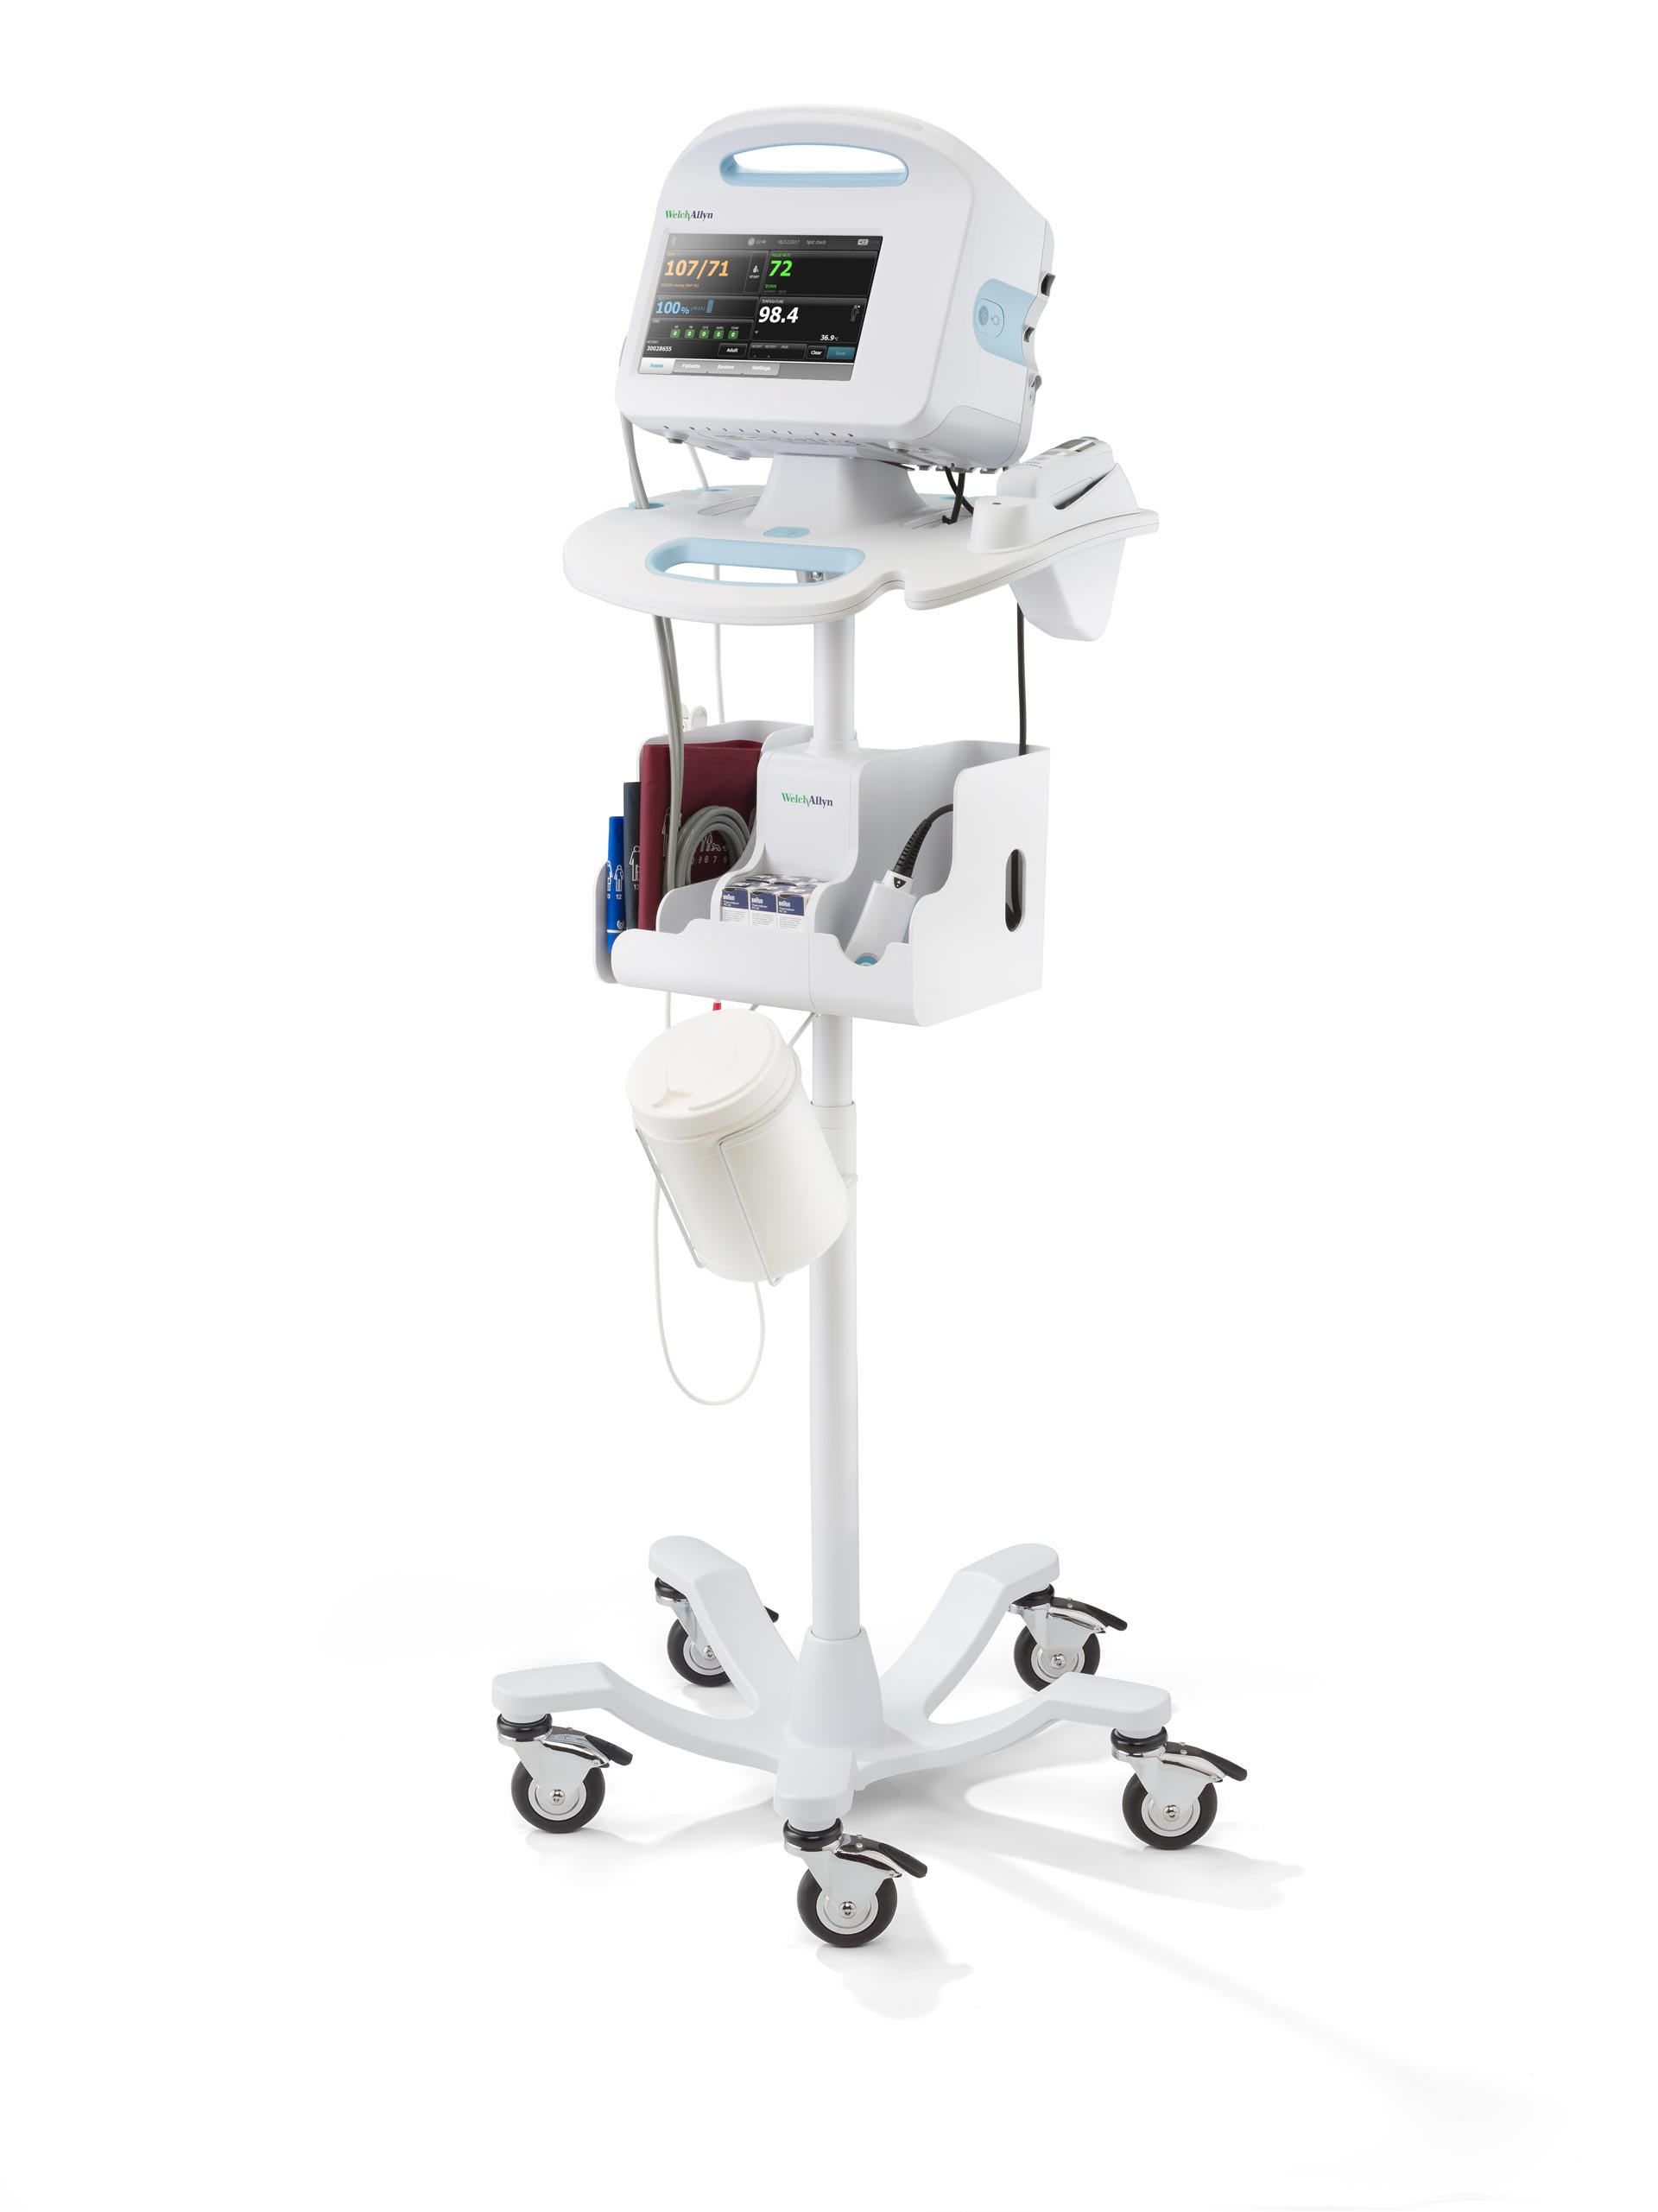 https://www.cardiacdirect.com/wp-content/uploads/2022/04/Welch-Allyn-Connex-6700-Vital-Signs-Monitor-mobile-stand.jpg